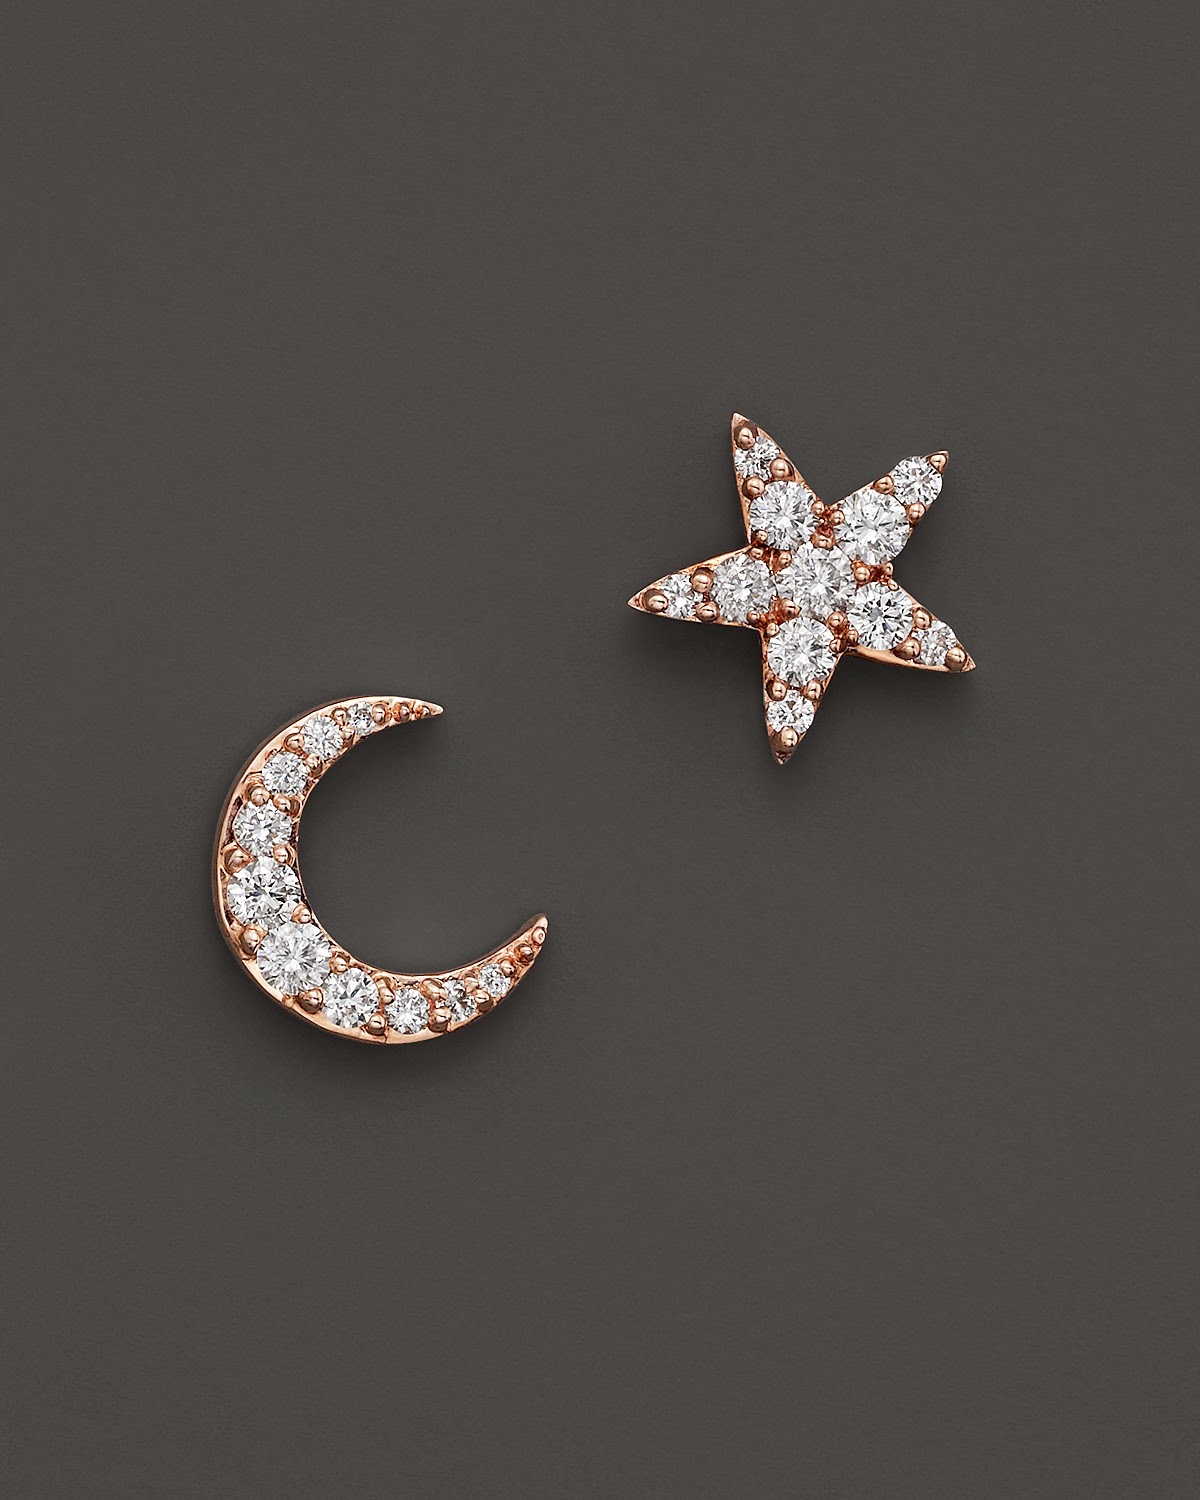 diamond earrings for baby girl star and moon shapes